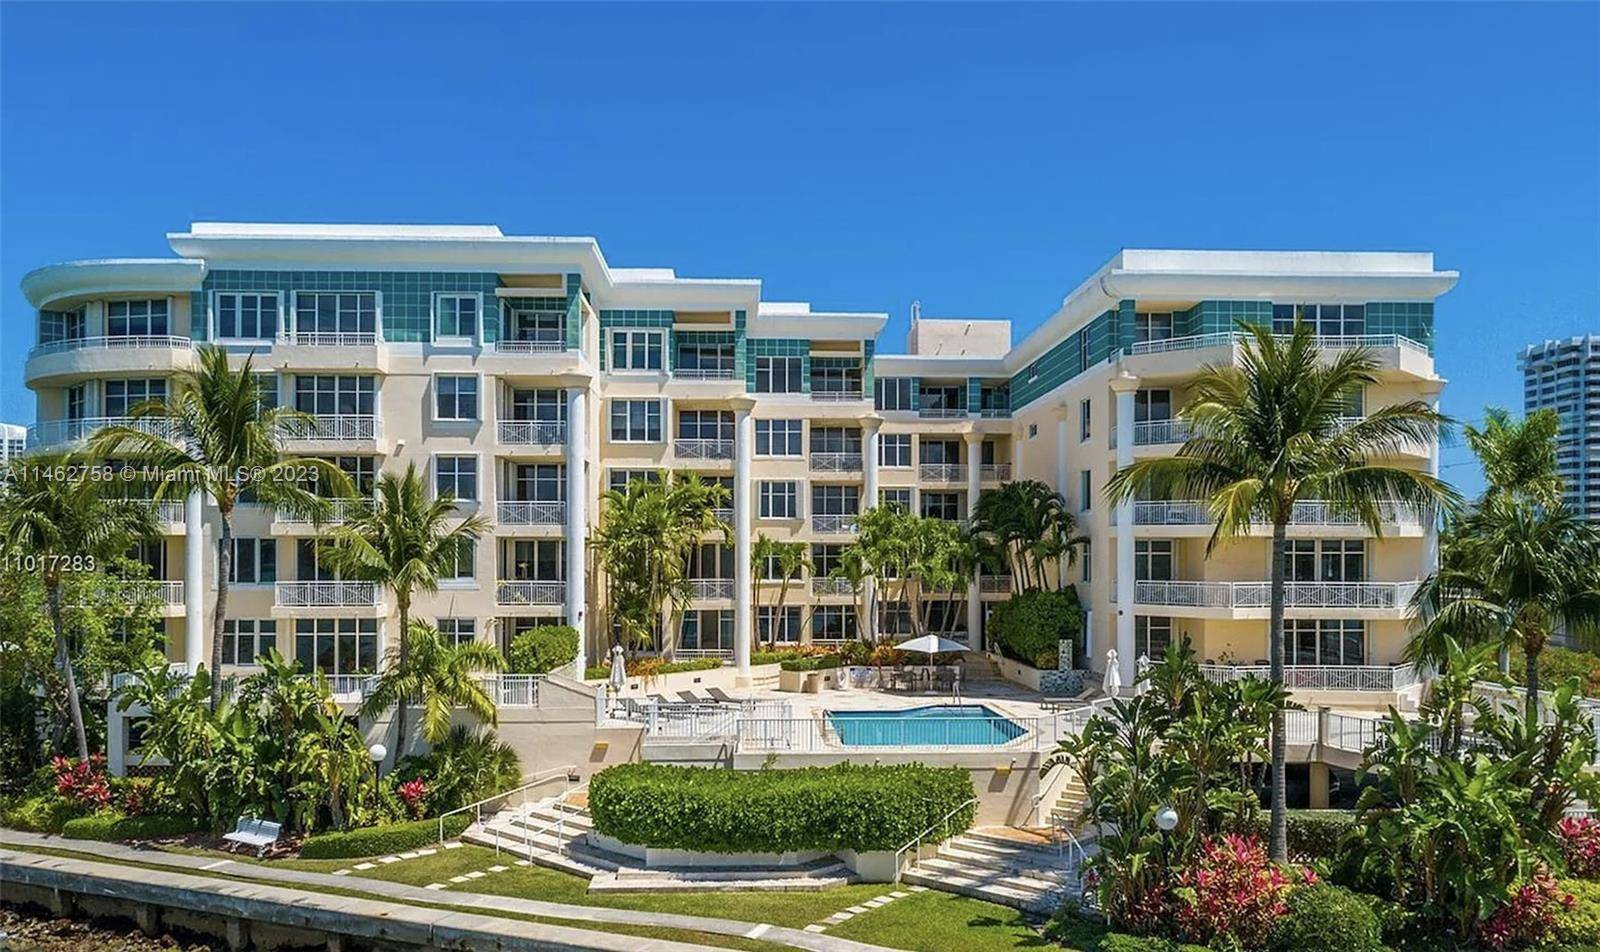 Discover the epitome of coastal living in this exquisite 2bed 2.